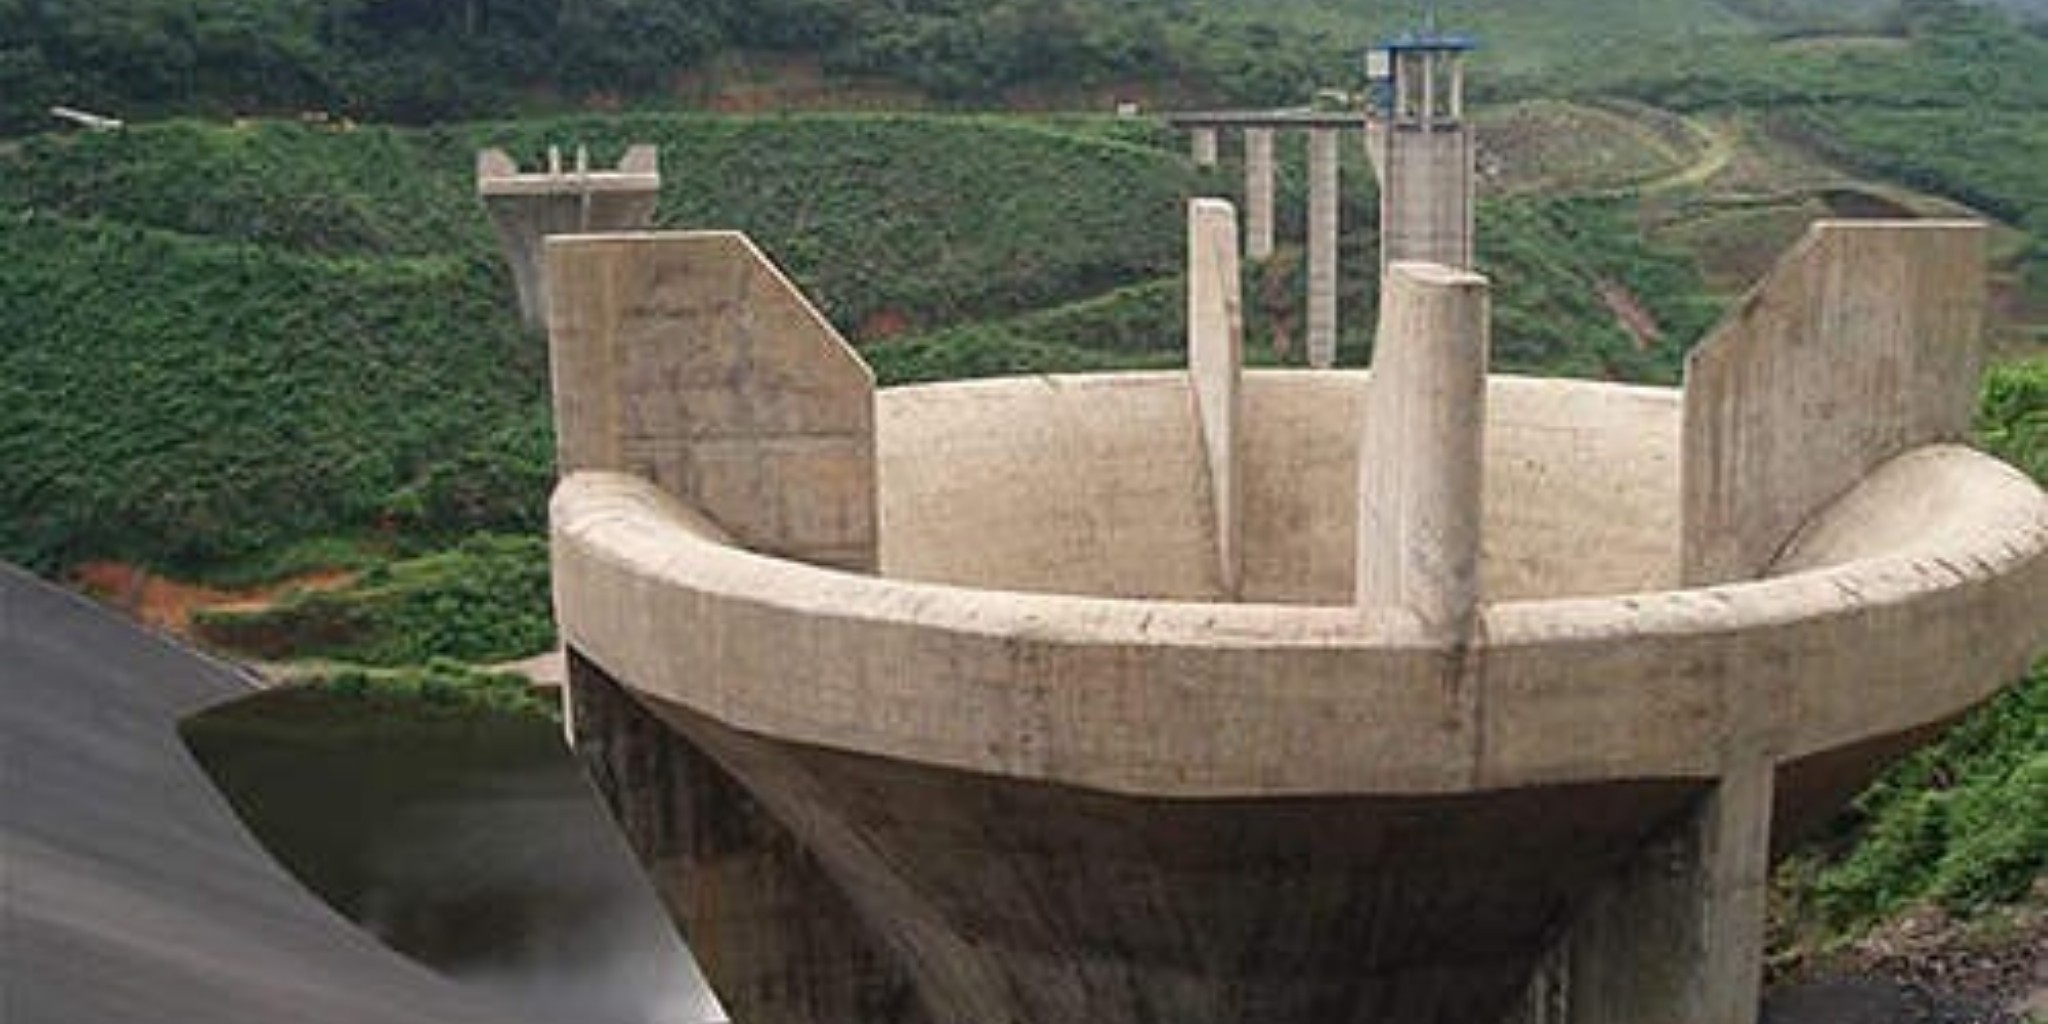 JUST IN: EDSA, EGTC to Commence Maintenance Work on Bumbuna Dam